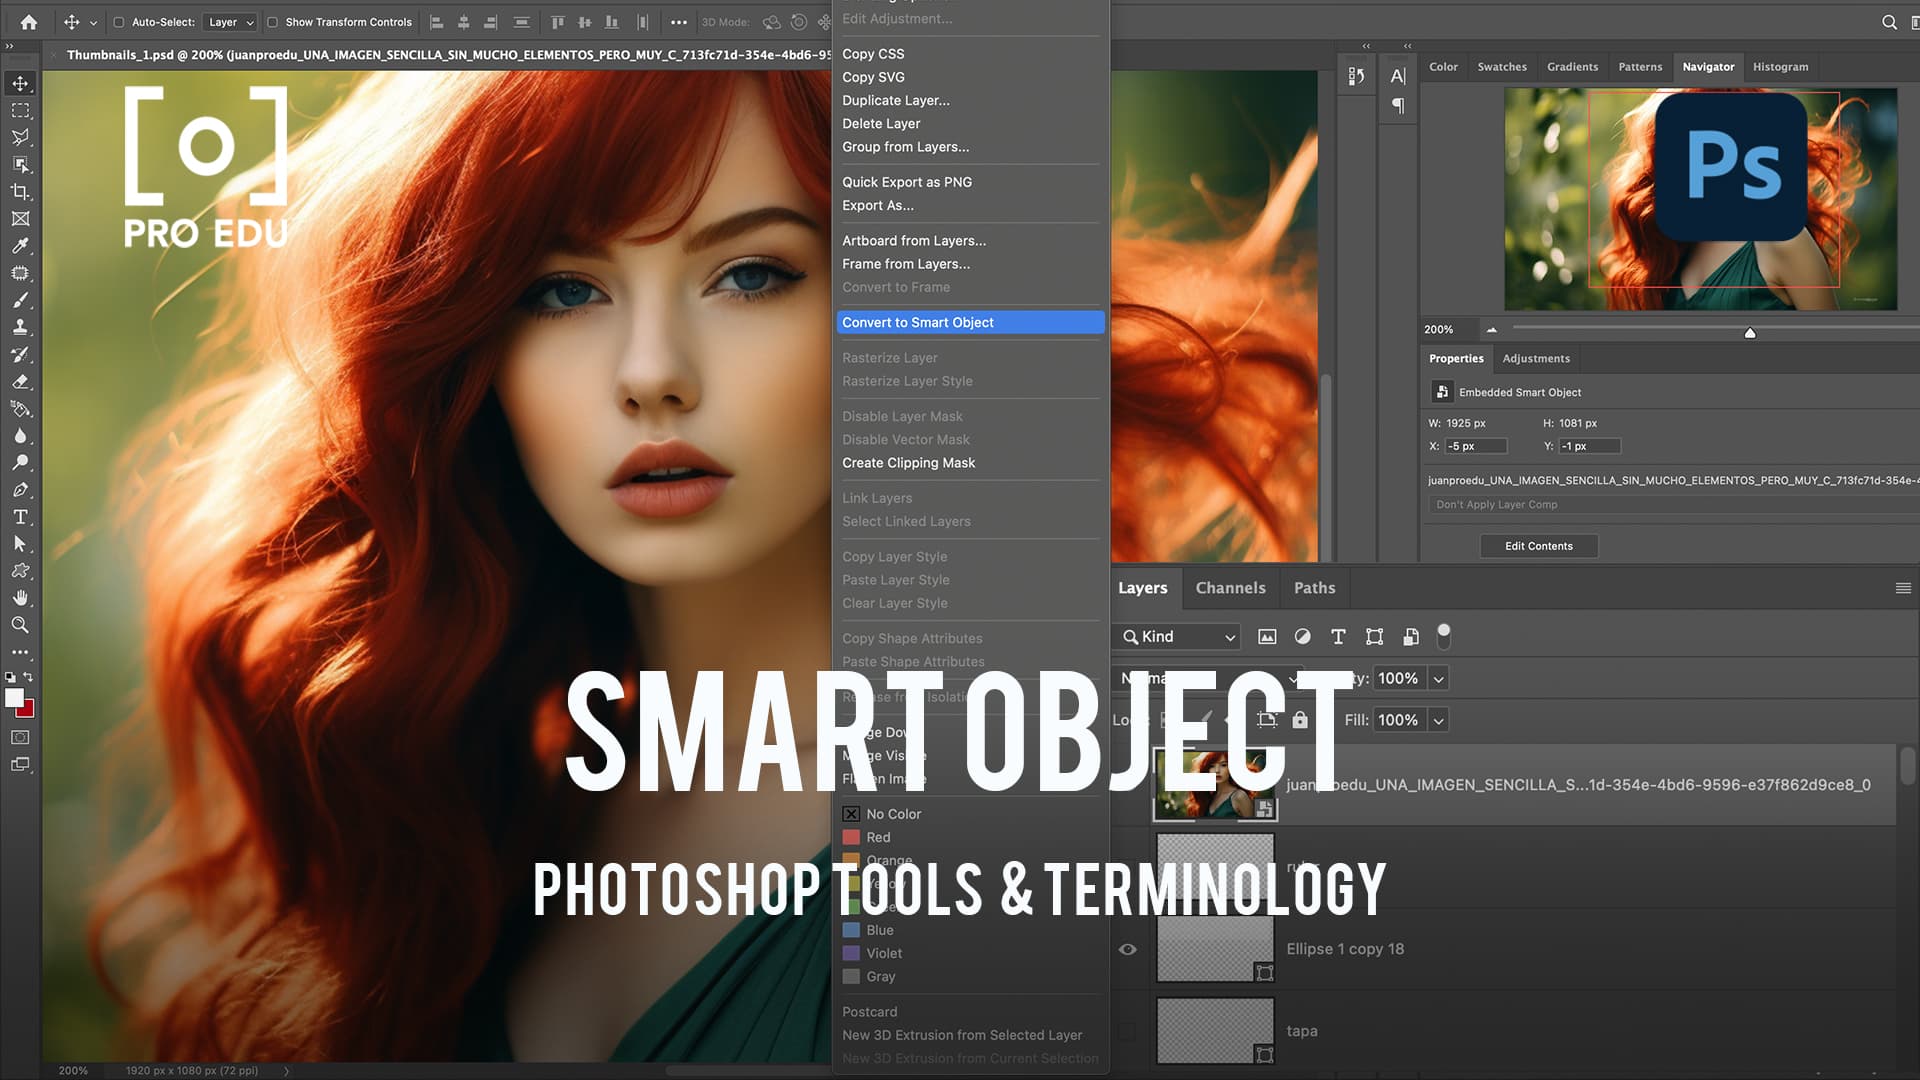 Smart Object Features in Photoshop - PRO EDU Guide